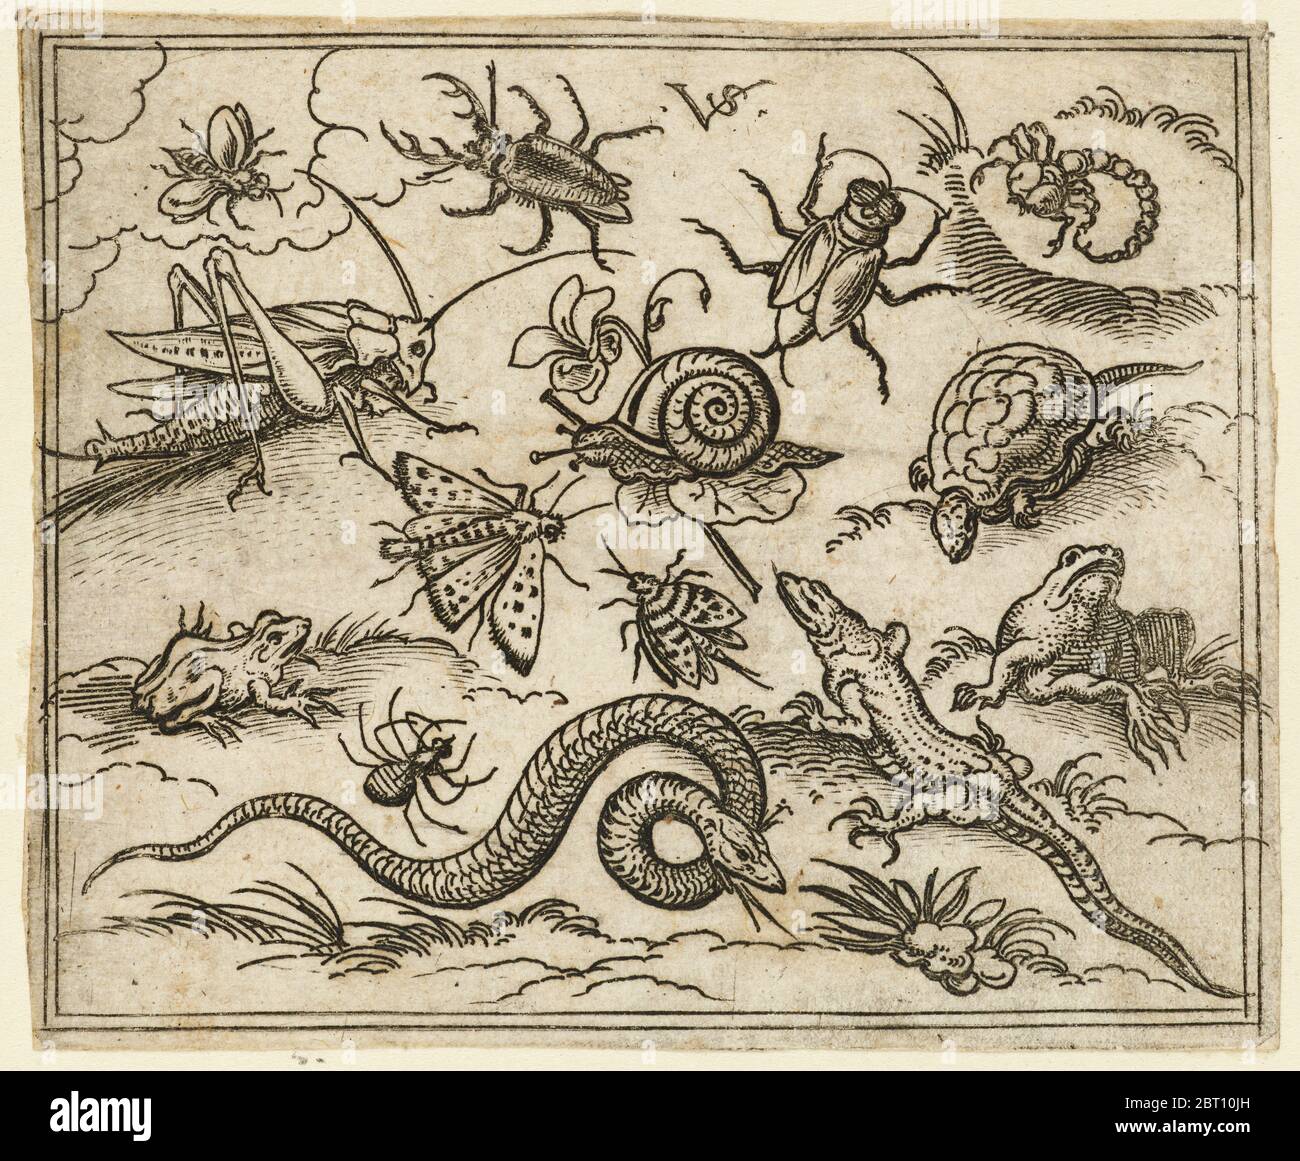 Group of insects and reptiles on plain ground with rocks, including an iguana, a lizard, a snake, a turtle, a scorpion, a snail, a spider, a beetle, and a cricket, 1557. From Douce Ornament Prints Album I. Stock Photo